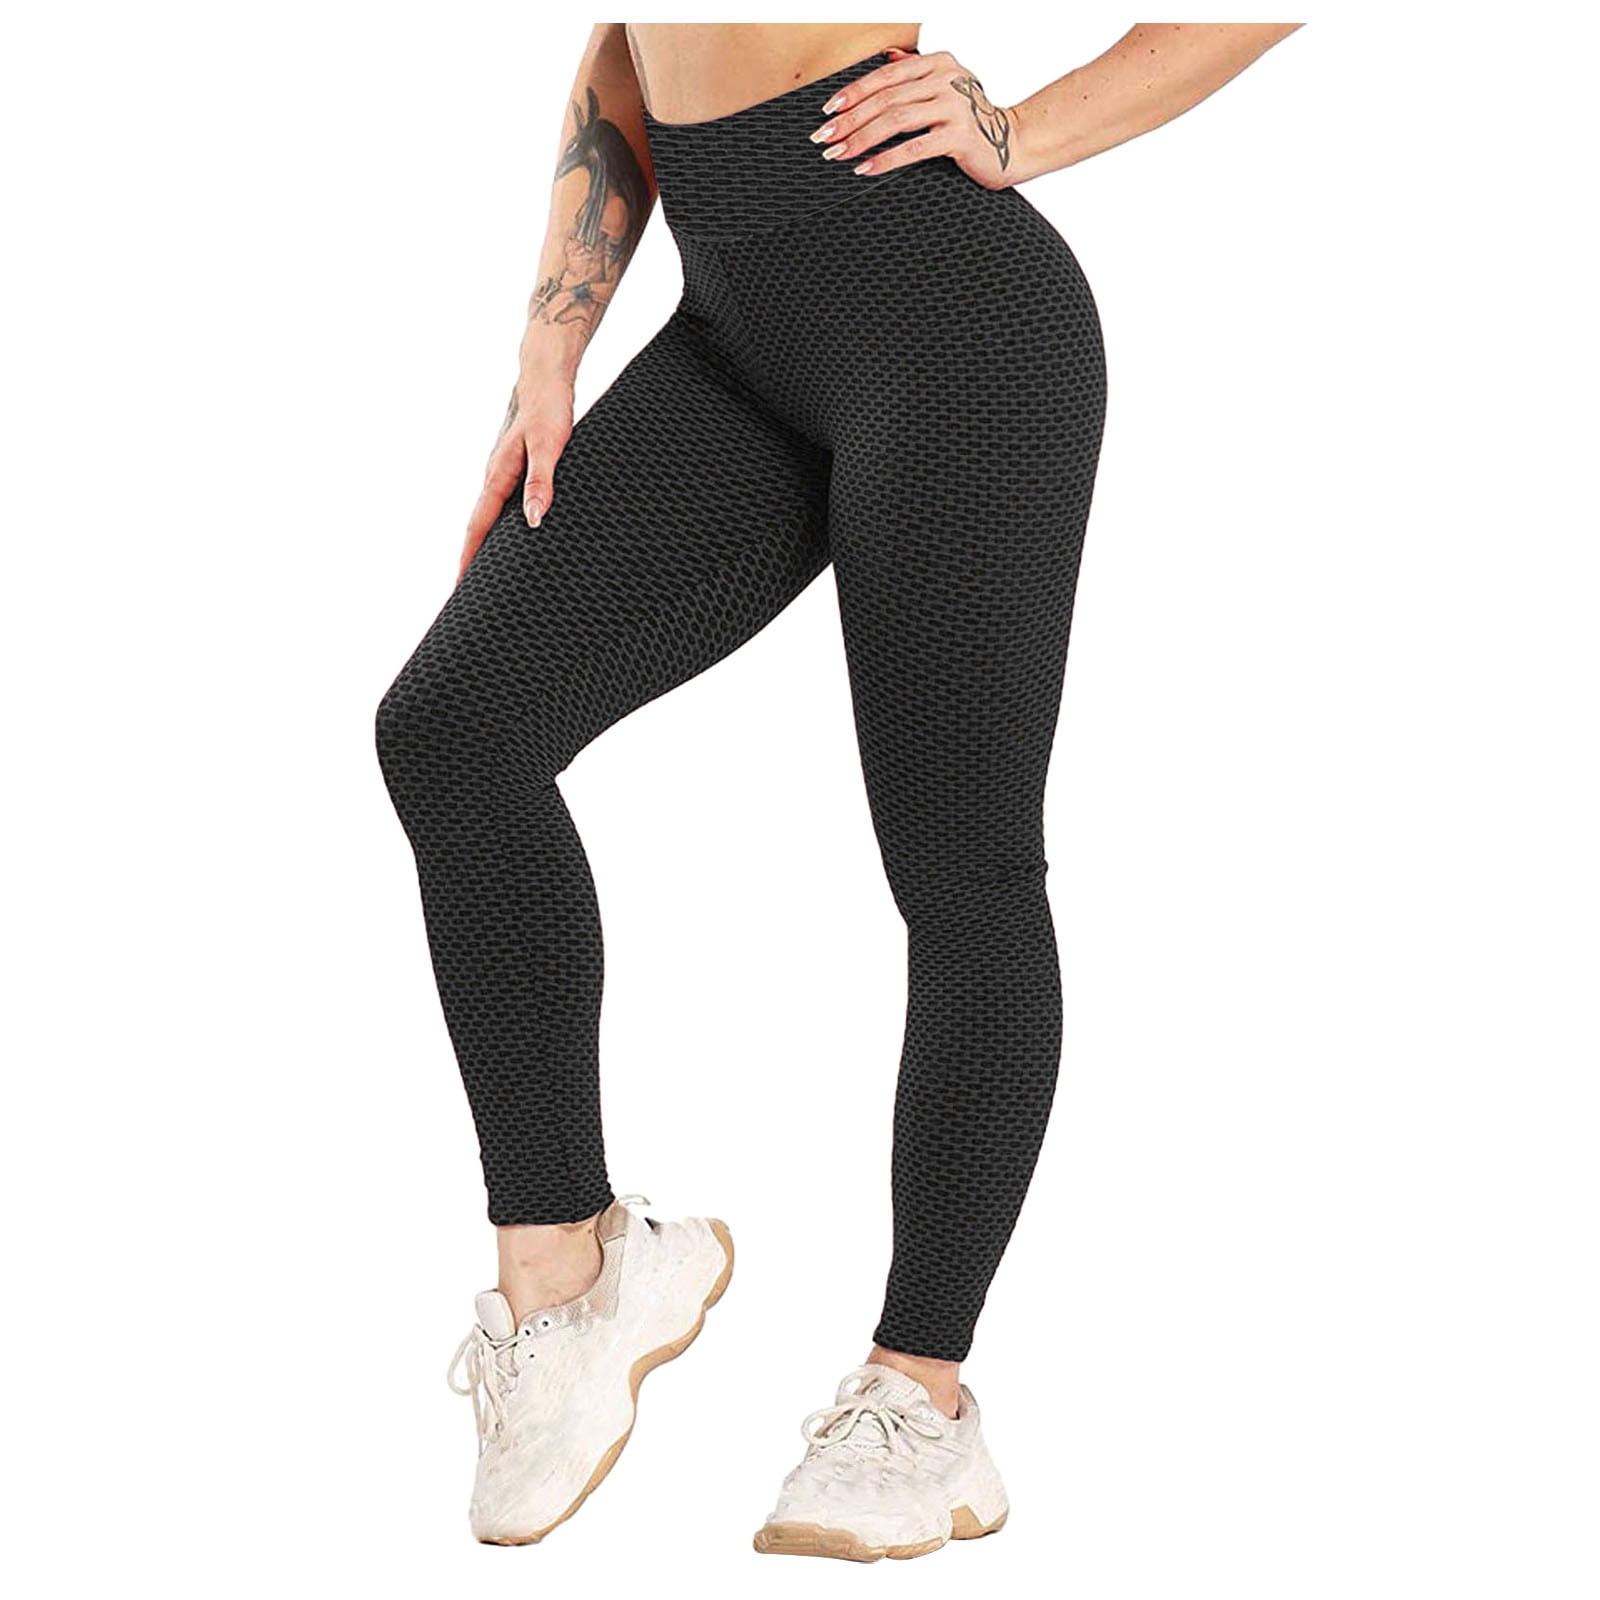 KaLI_store Work Pants for Women Thick High Waist Yoga Pants with